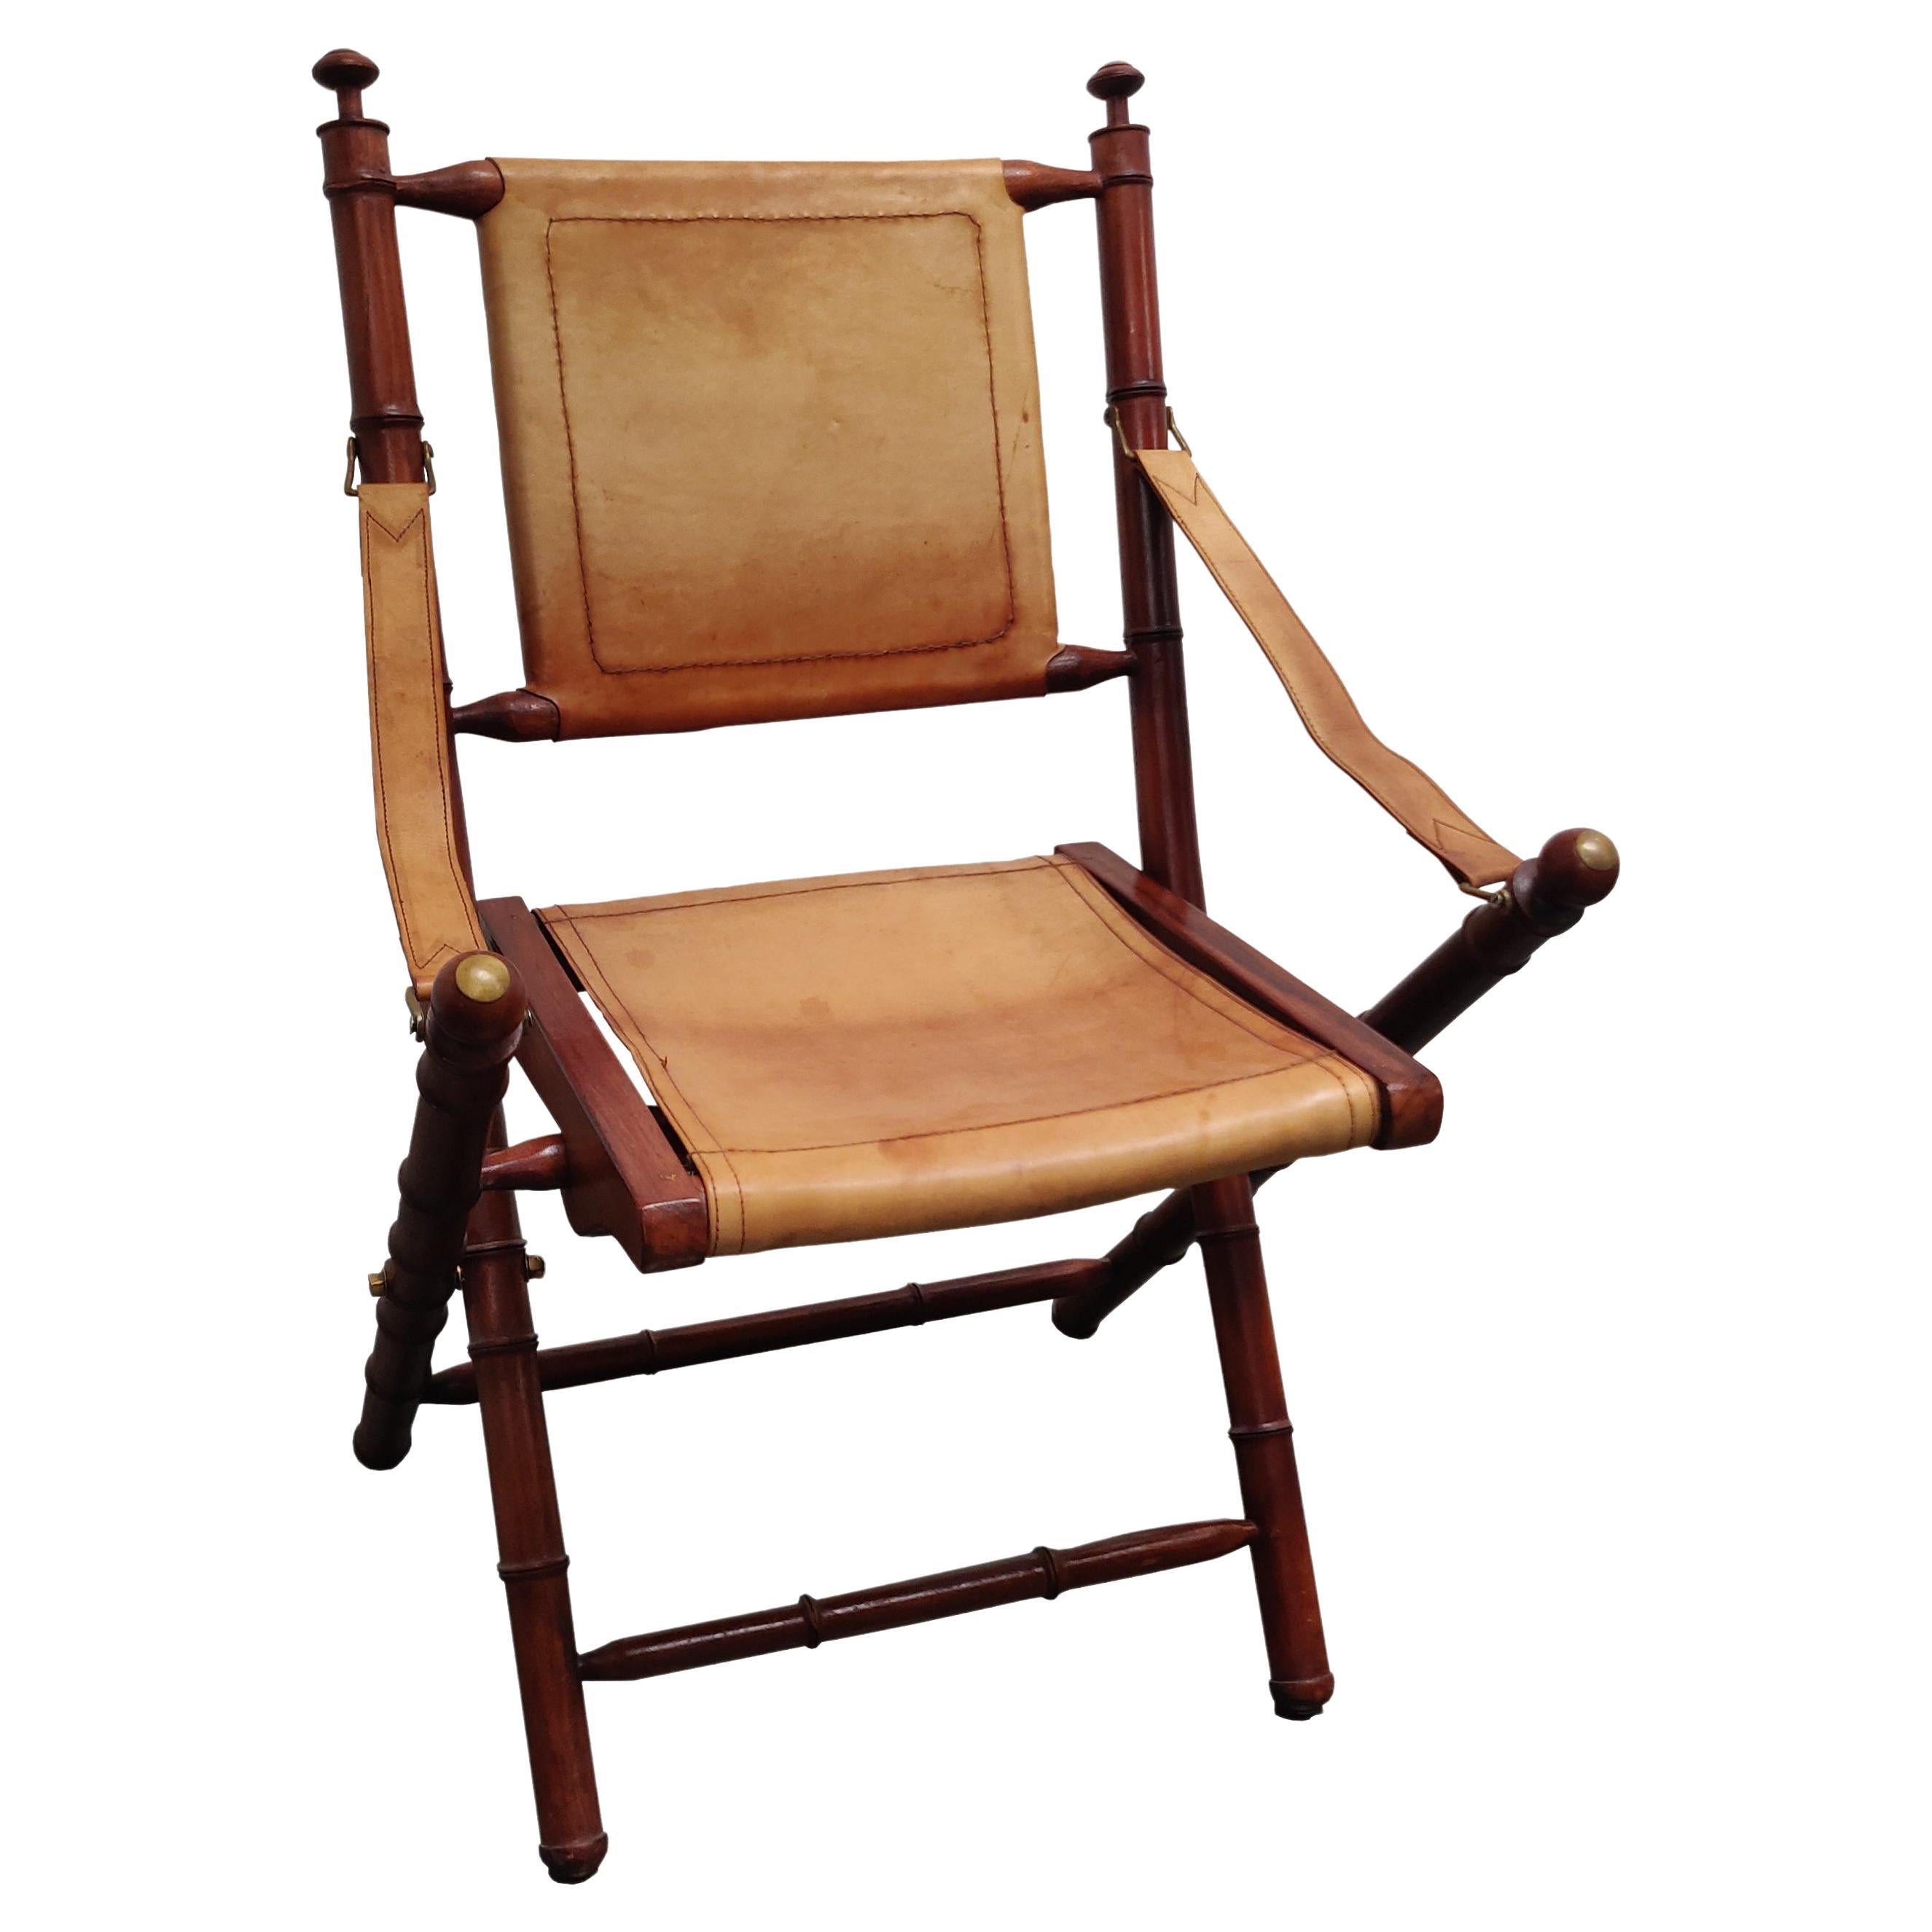 Faux Bamboo and leather folding officer safari chair. For Sale